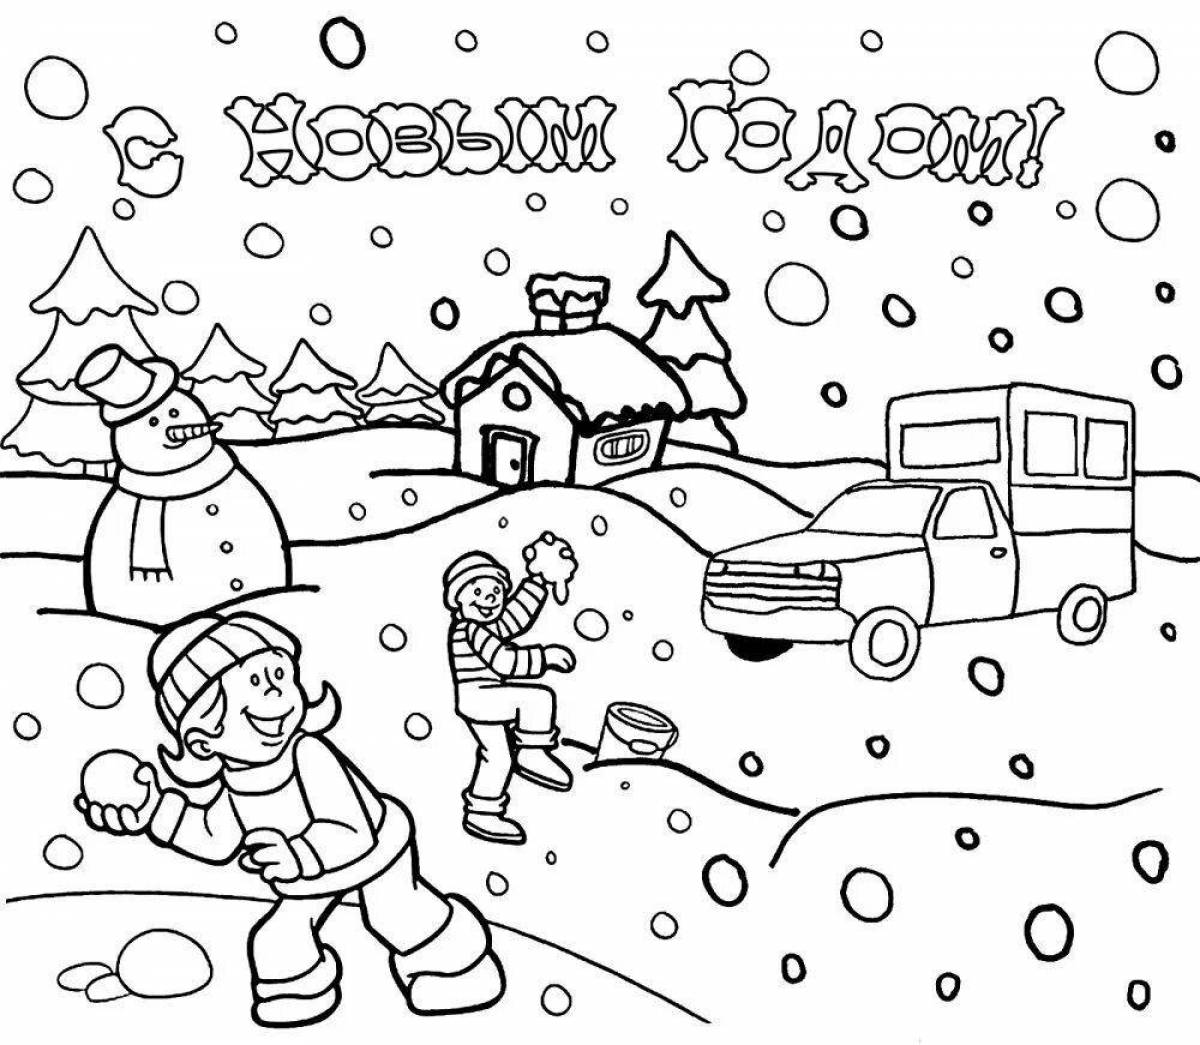 Fantastic winter coloring book for children 8 years old